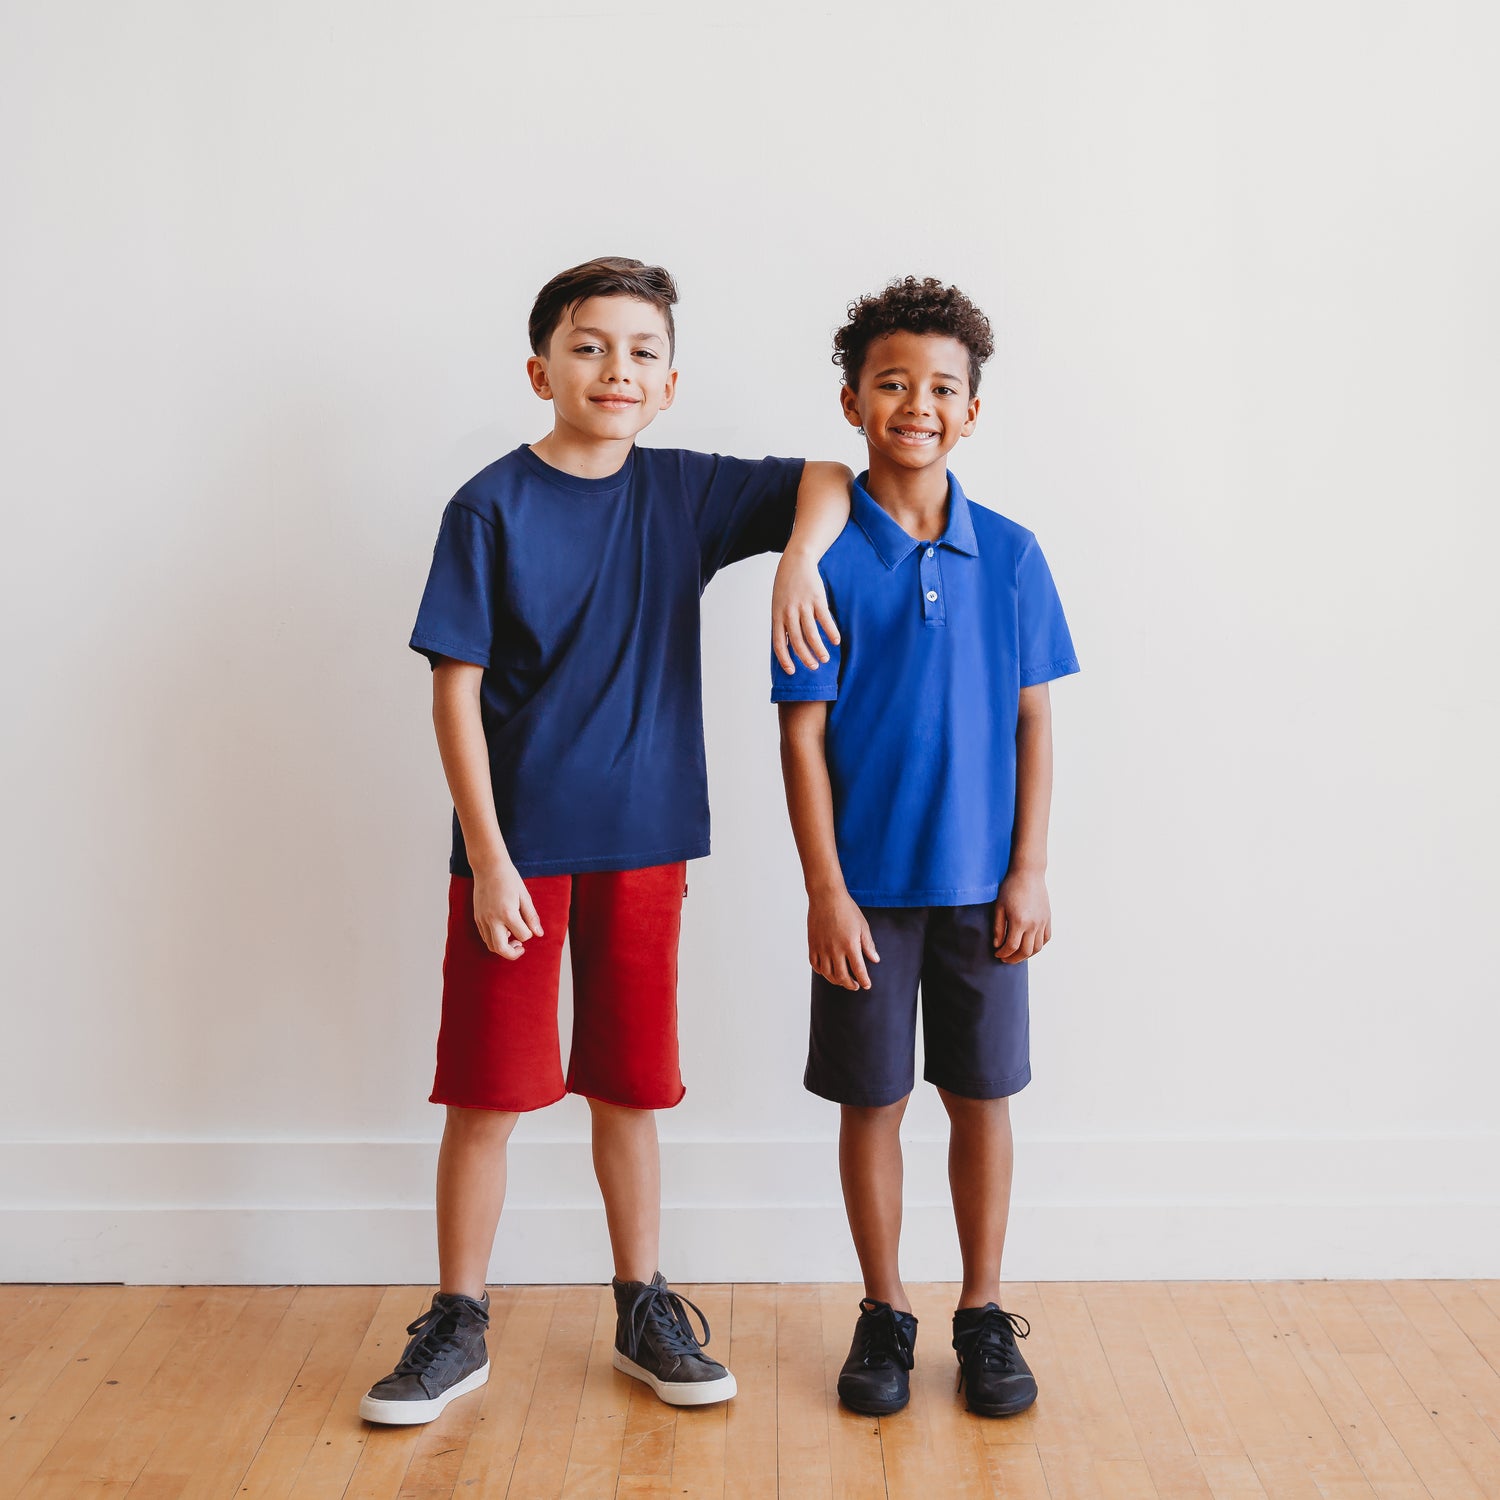 Sensory Friendly Clothing for kids that is adaptive